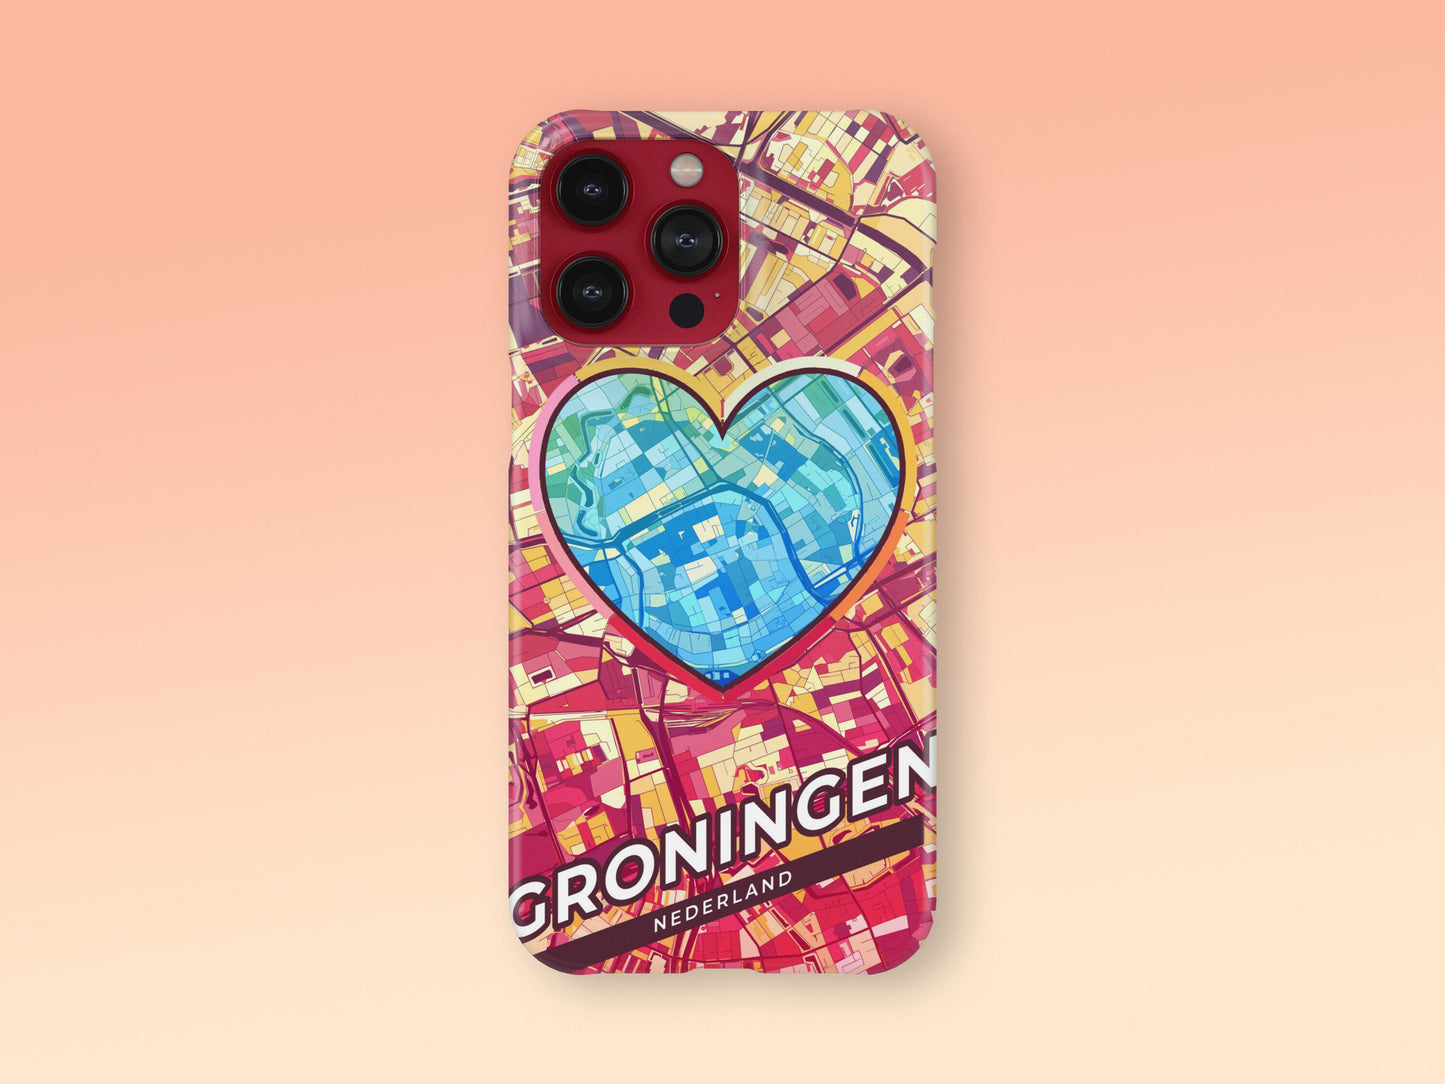 Groningen Netherlands slim phone case with colorful icon. Birthday, wedding or housewarming gift. Couple match cases. 2